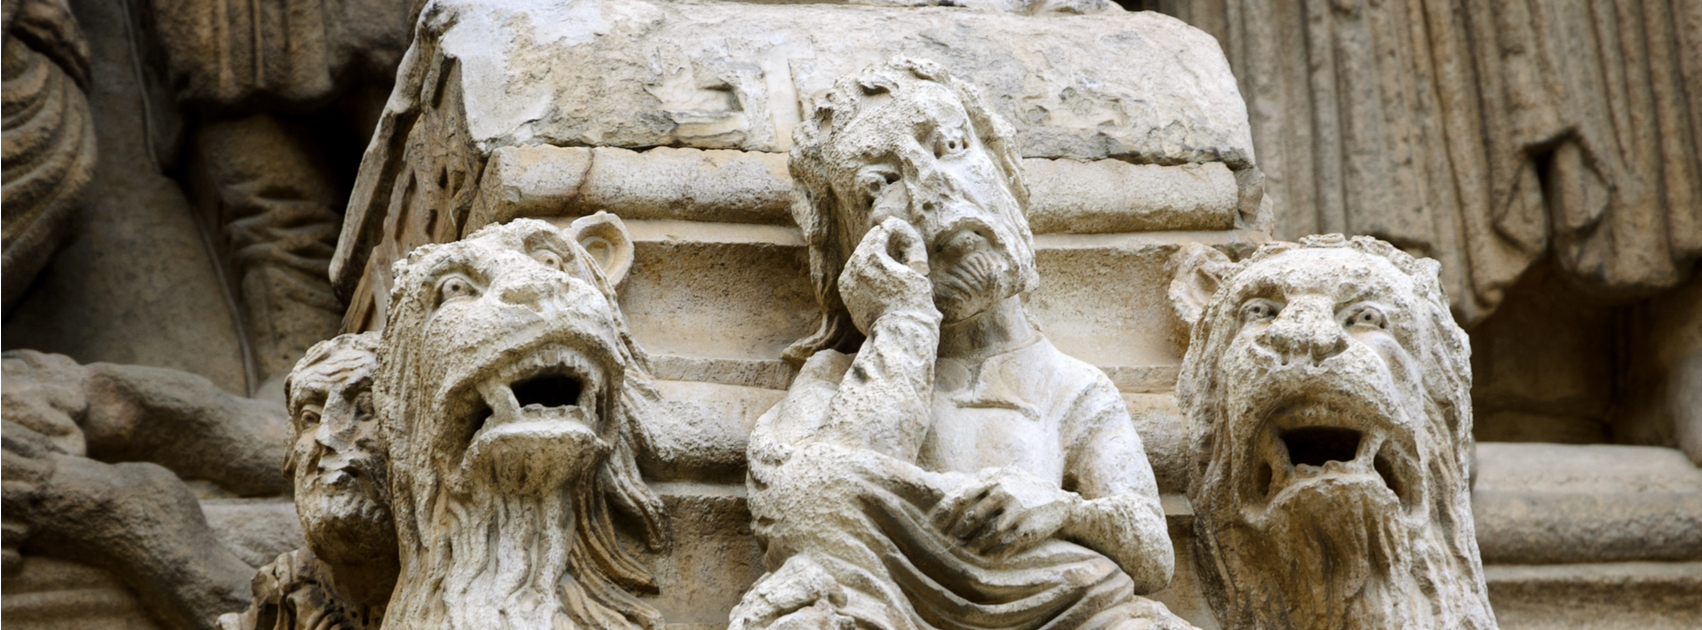 Daniel in the lions' den. Architectural detail. Facade of the church of St. Trophime in Arles. (Provence, France)